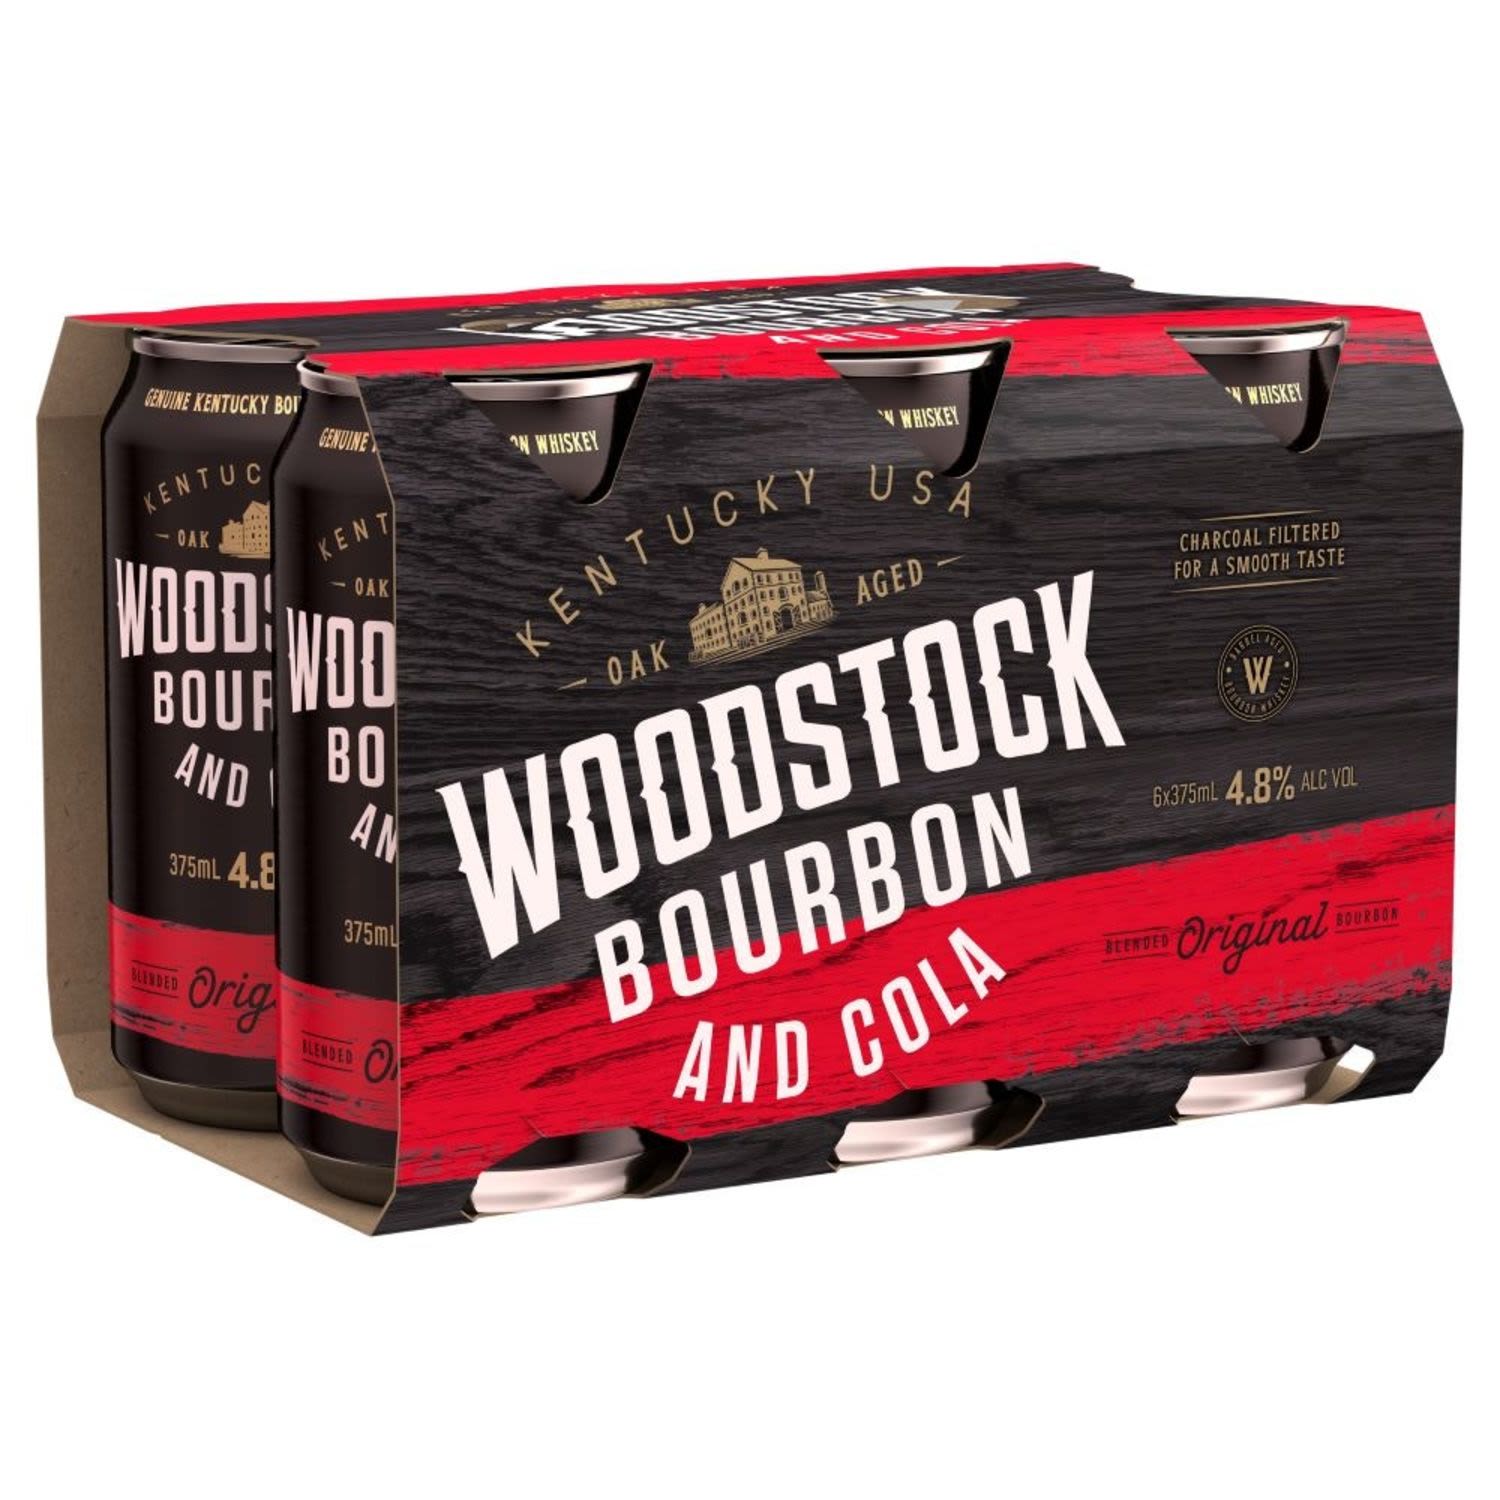 Woodstock Bourbon & Cola 4.8% Can 375mL 6 Pack